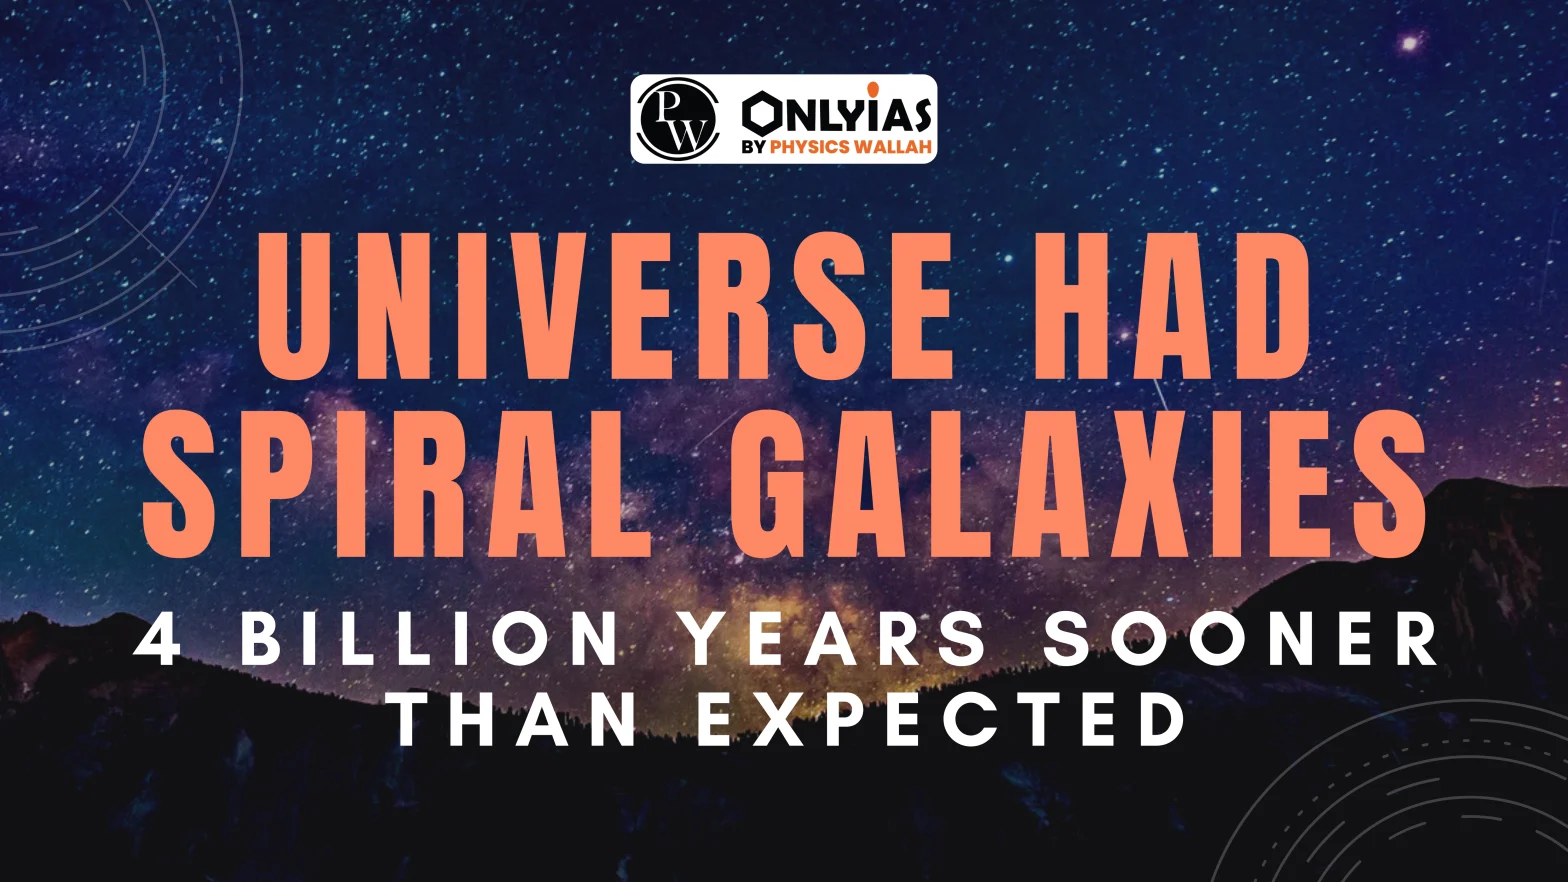 Universe had spiral galaxies 4 billion years sooner than expected